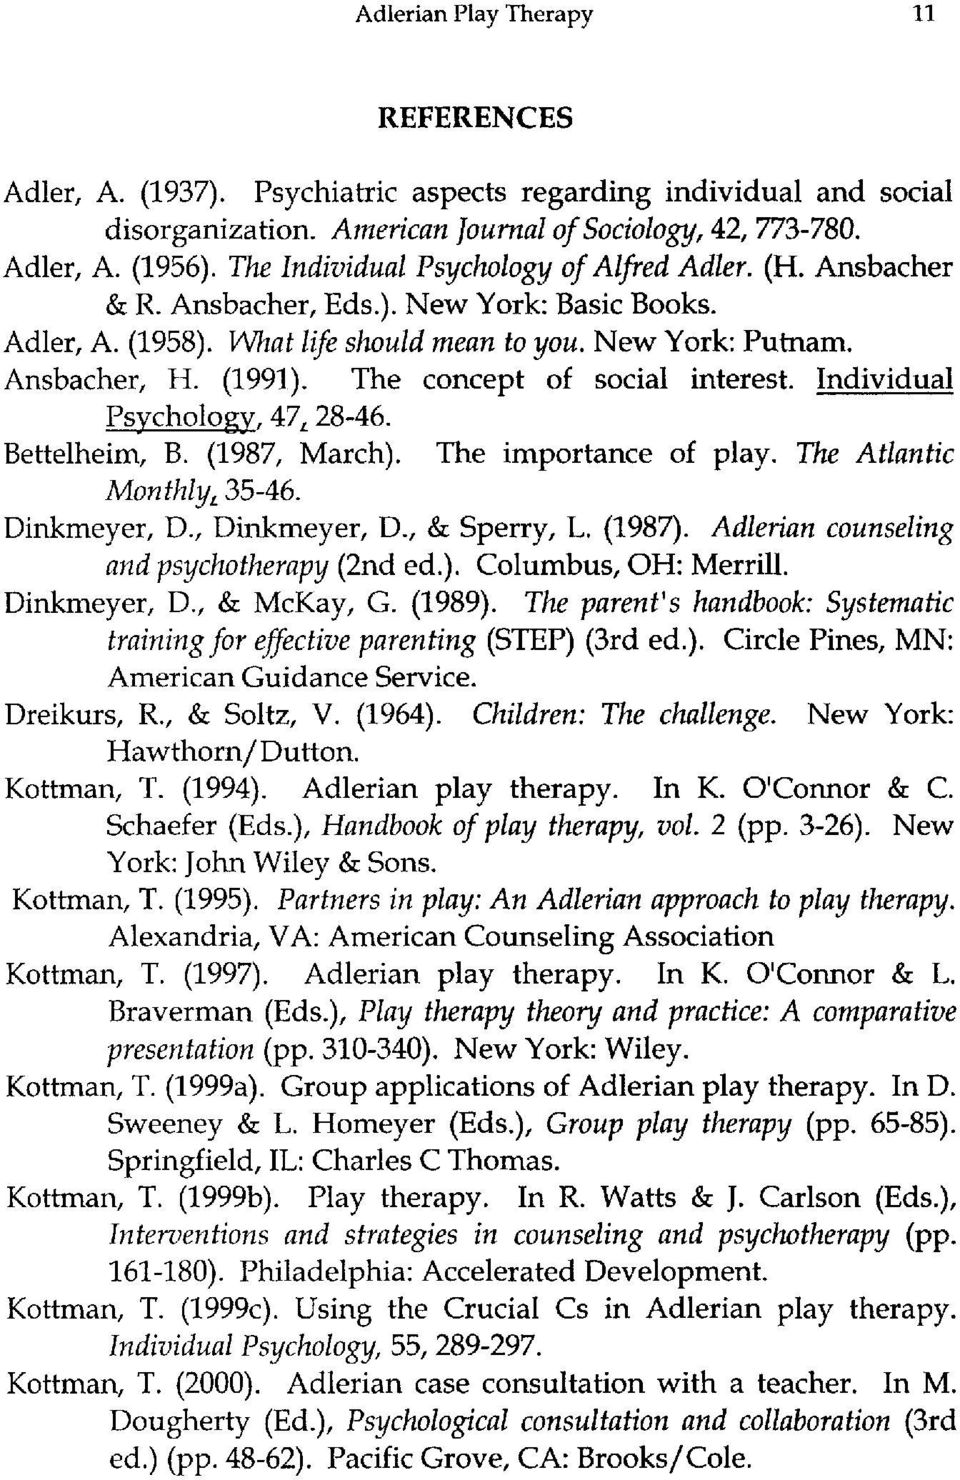 The concept of social interest. Individual Psychology, 47,28-46. Bettelheim, B. (1987, March). The importance of play. The Atlantic MonthlyL 35-46. Dinkmeyer, D., Dinkmeyer, D., & Sperry, L. (1987).